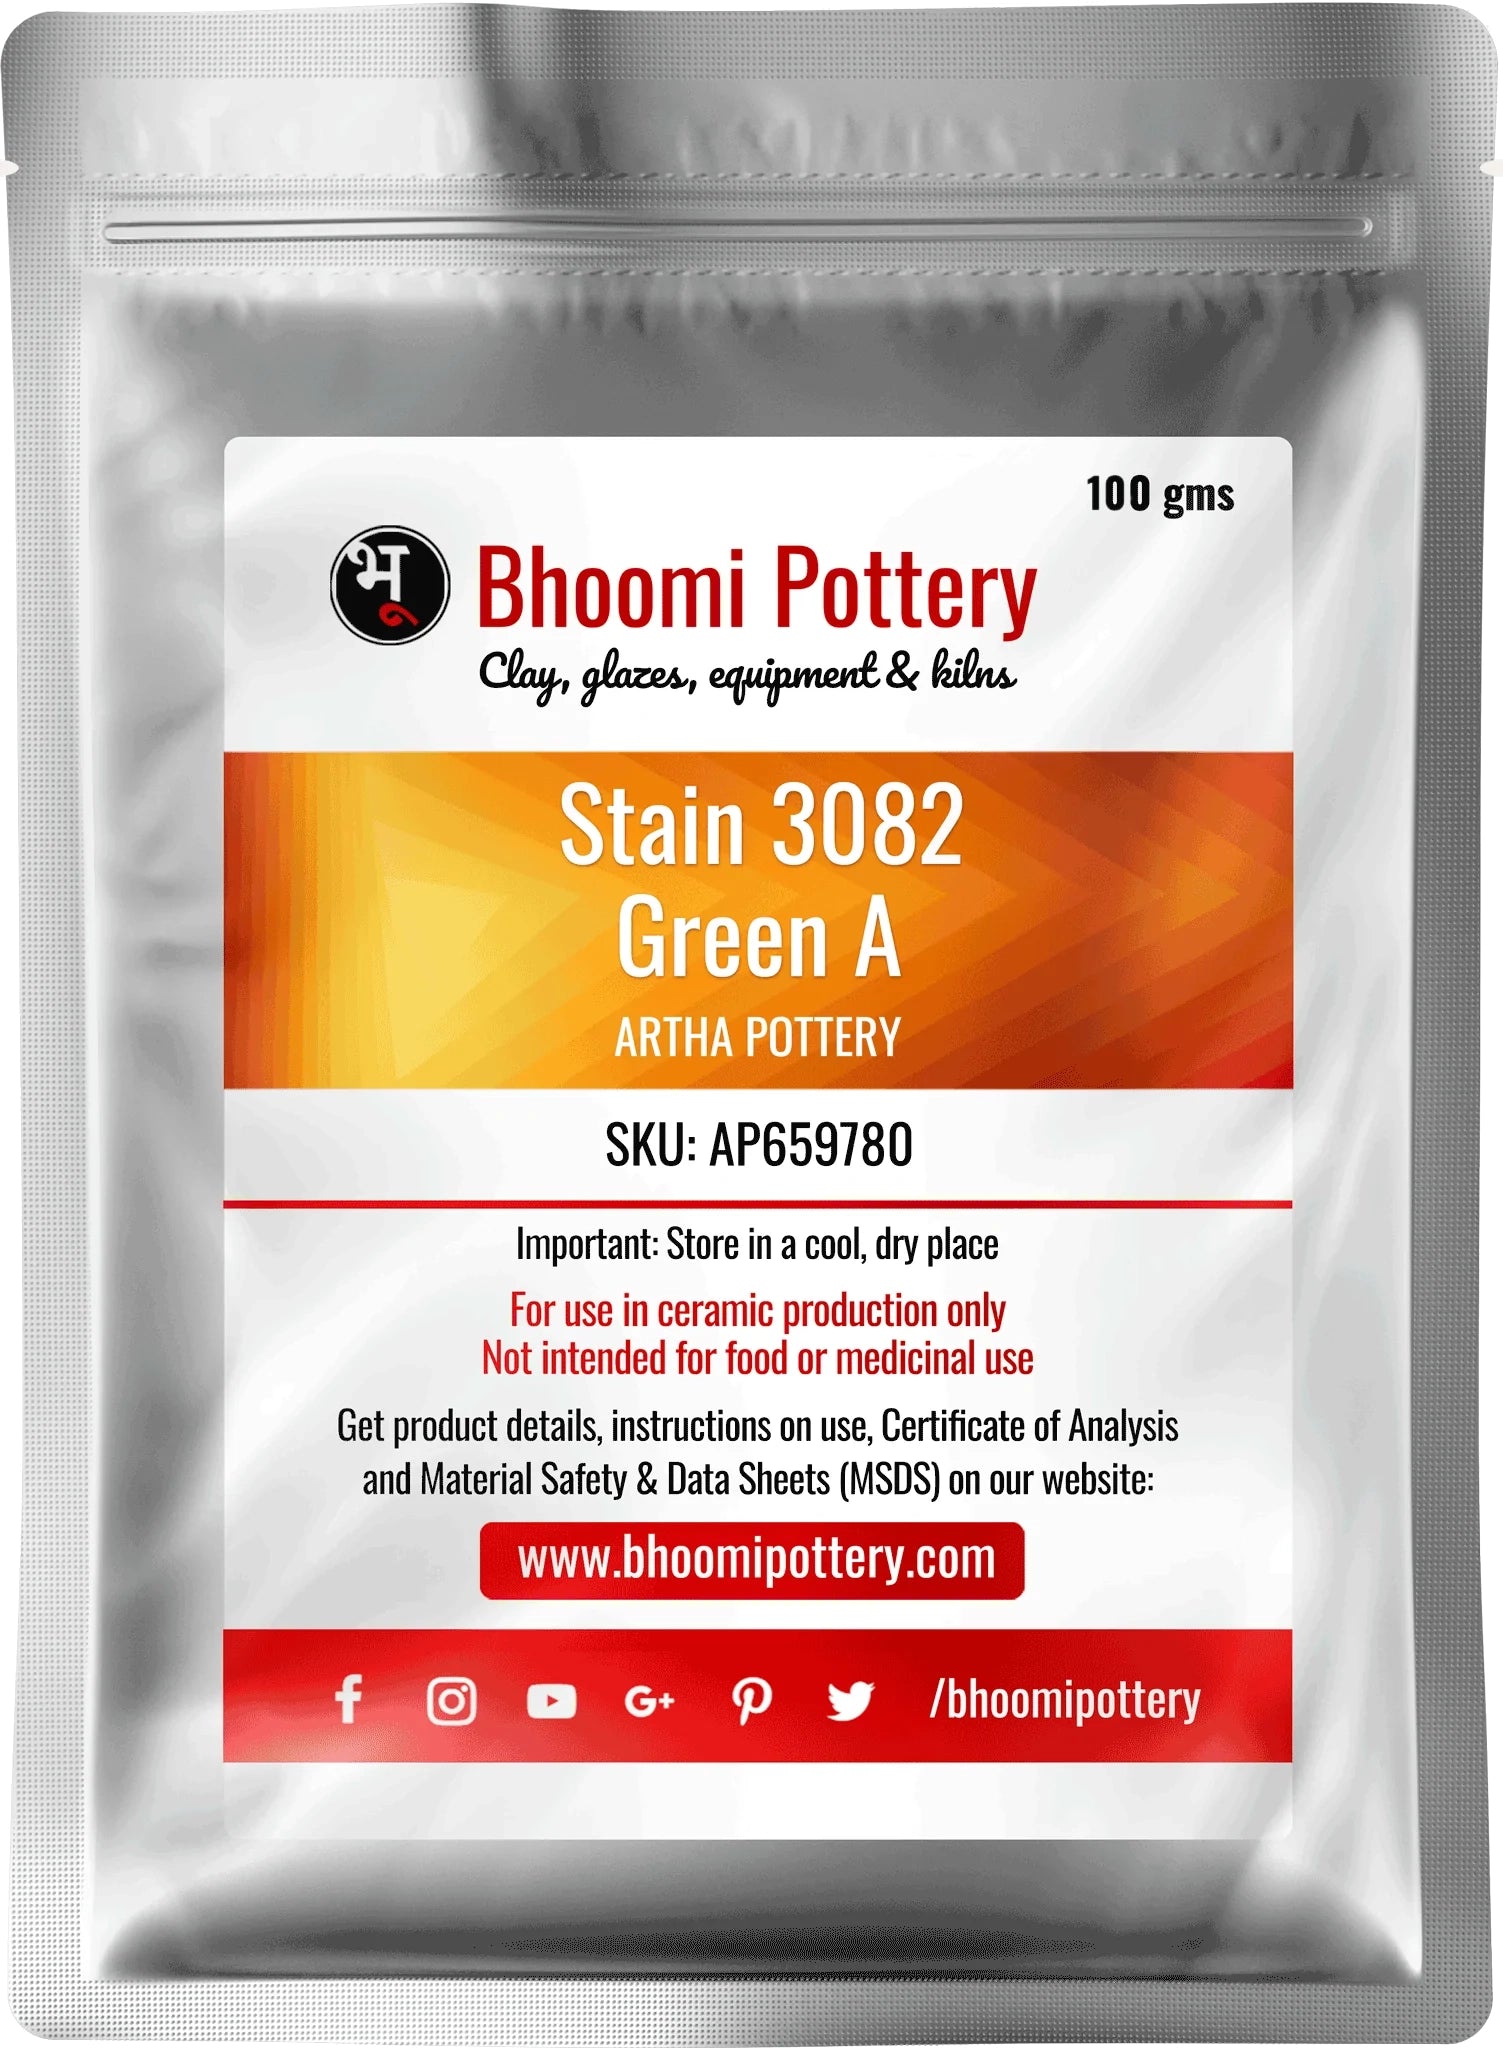 Stain 3082 Green A 100 gms